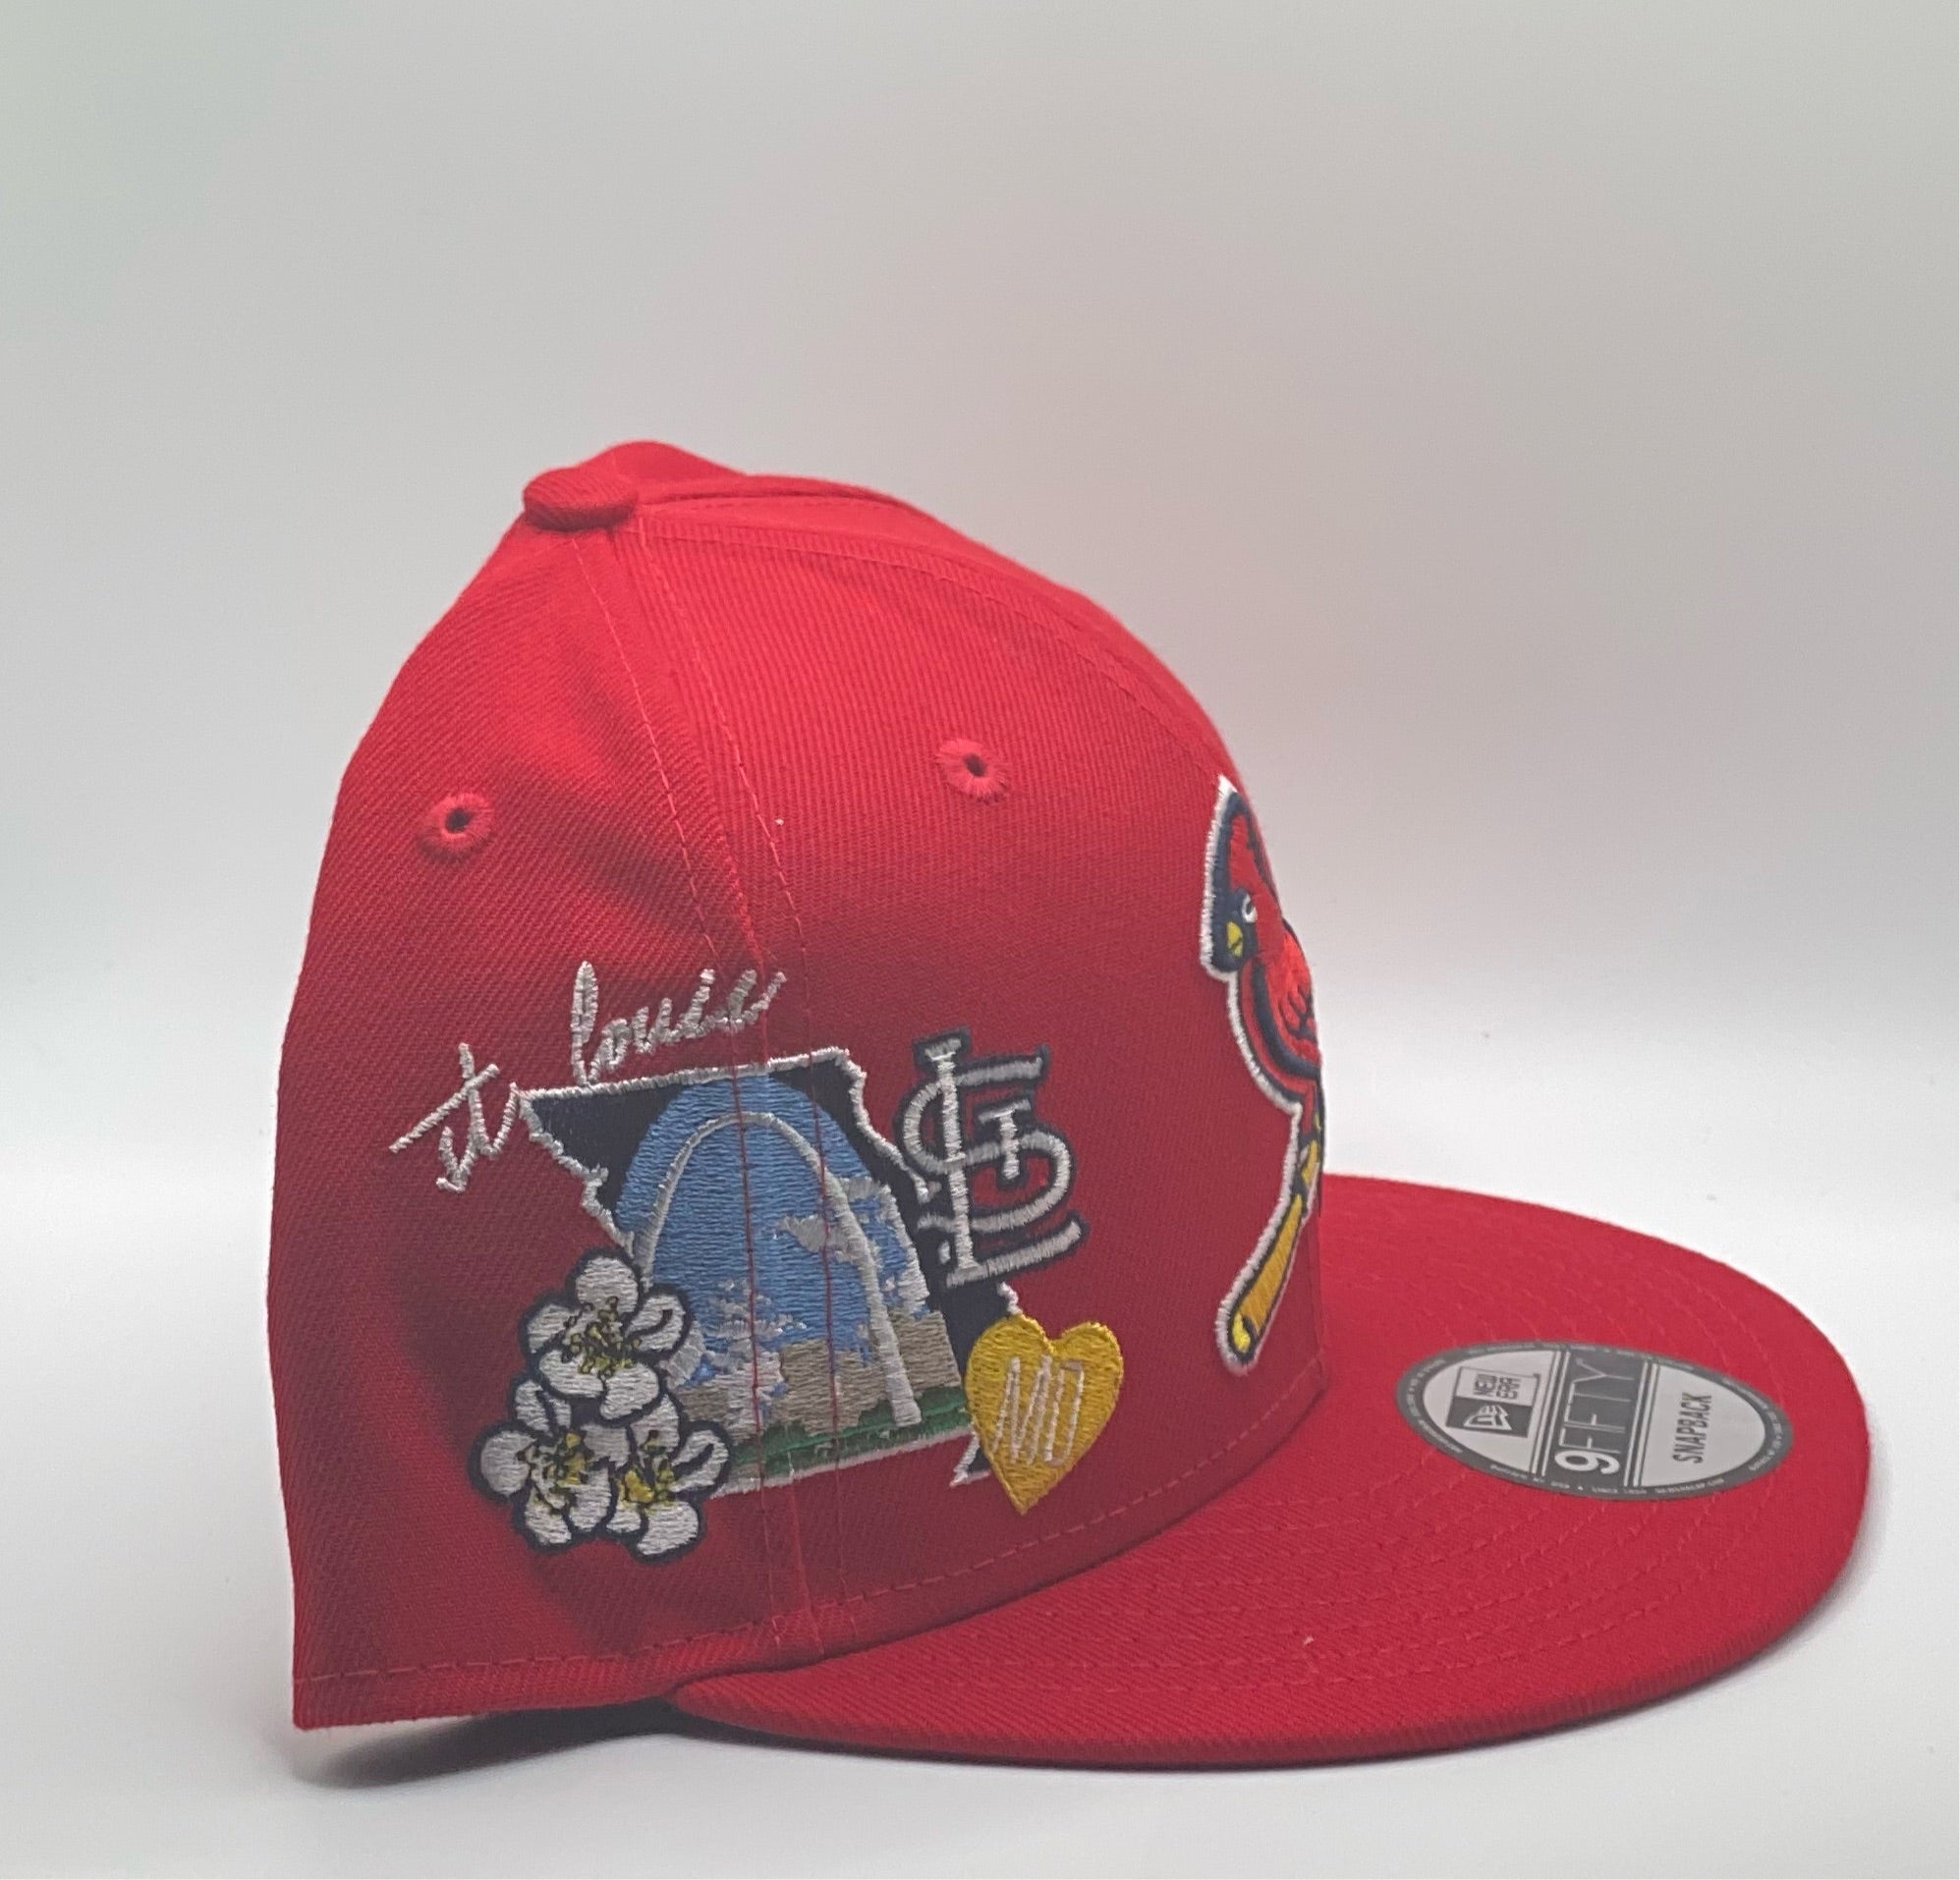 Men's St. Louis Cardinals New Era Red Patch Pride 59FIFTY Fitted Hat